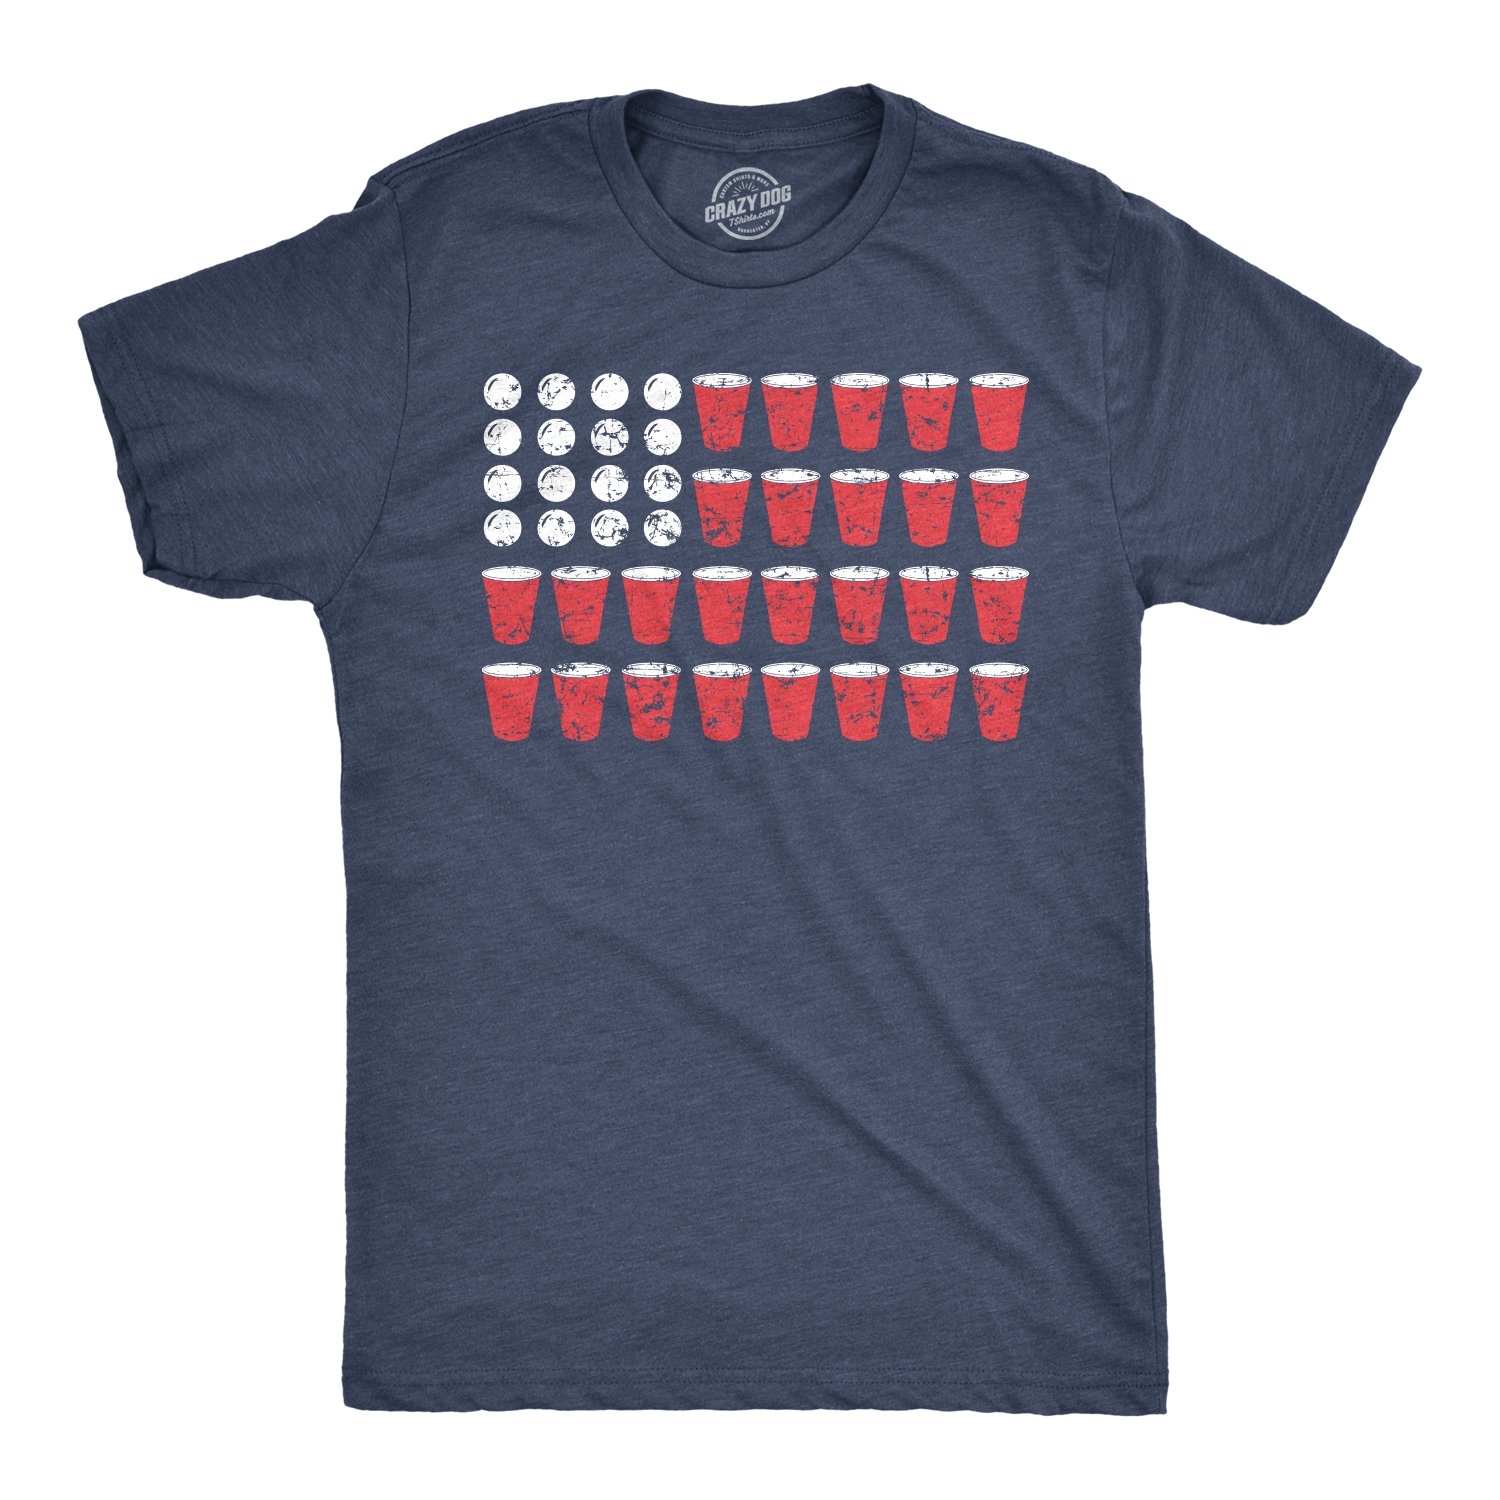 Mens American Flag Beer Pong Tshirt Funny Fourth of July Drinking Tee for Guys